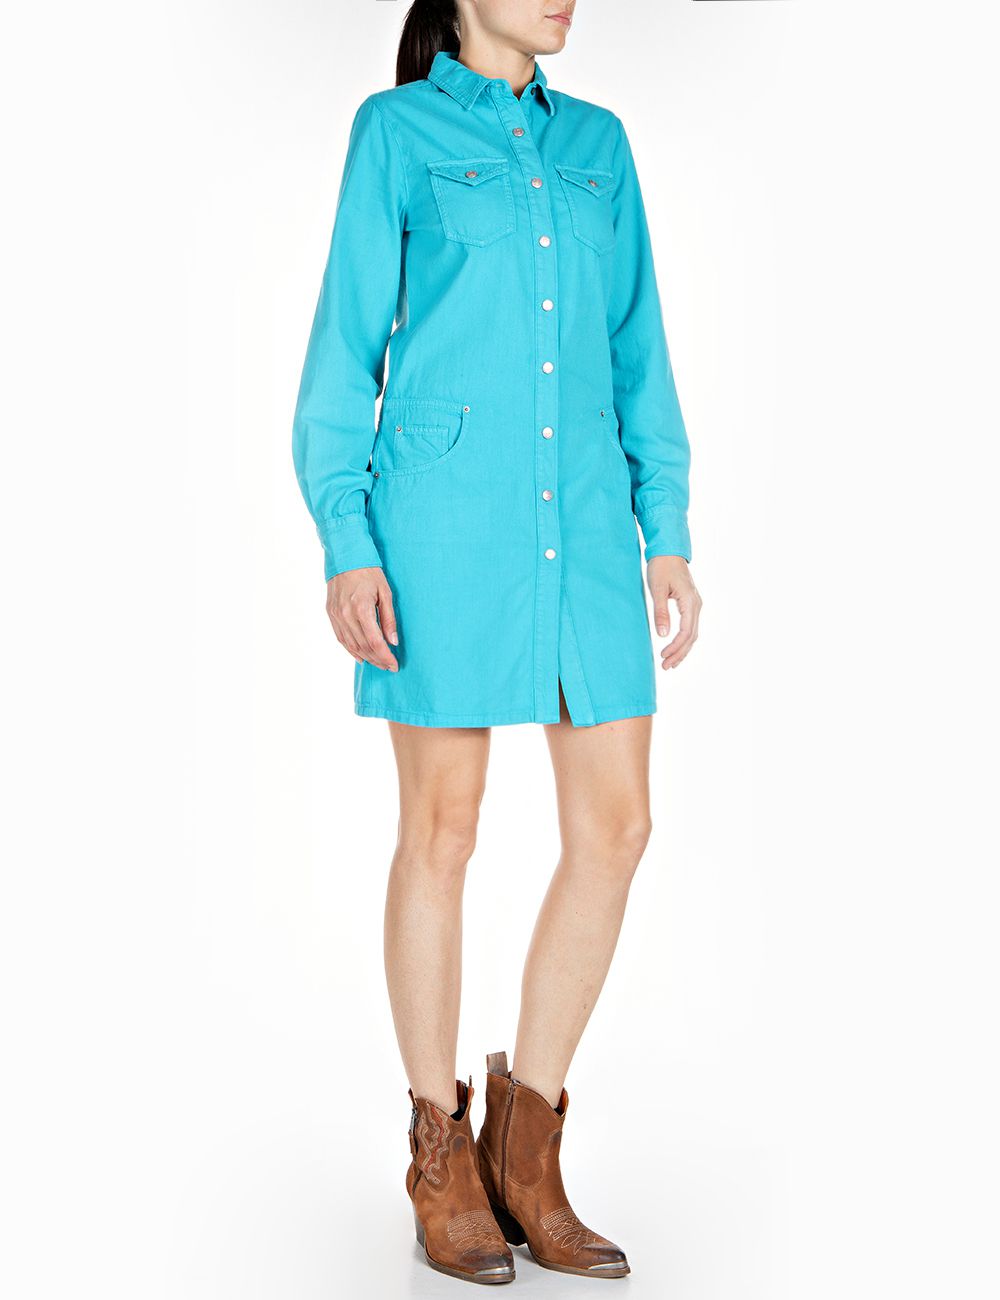 Replay Rose Label Denim Dress - Turquoise - Stick and Ribbon